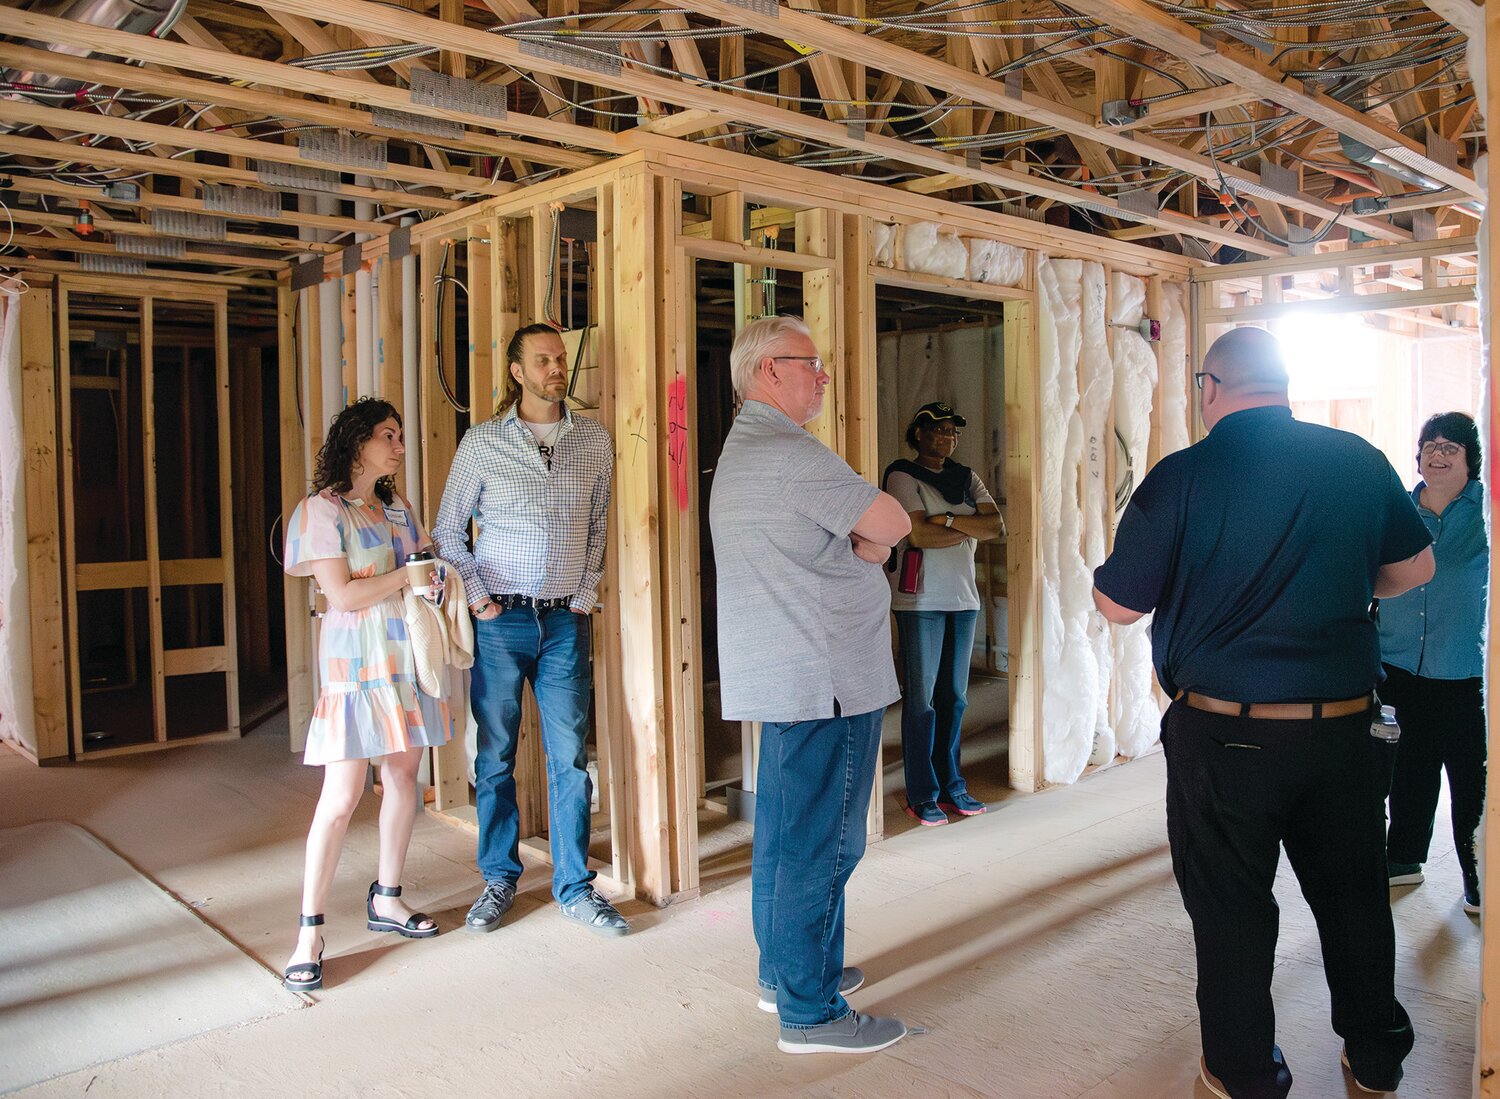 Celebrating Solebury featured tours of Solebury School’s dormitory-in-progress, Hope Hall.